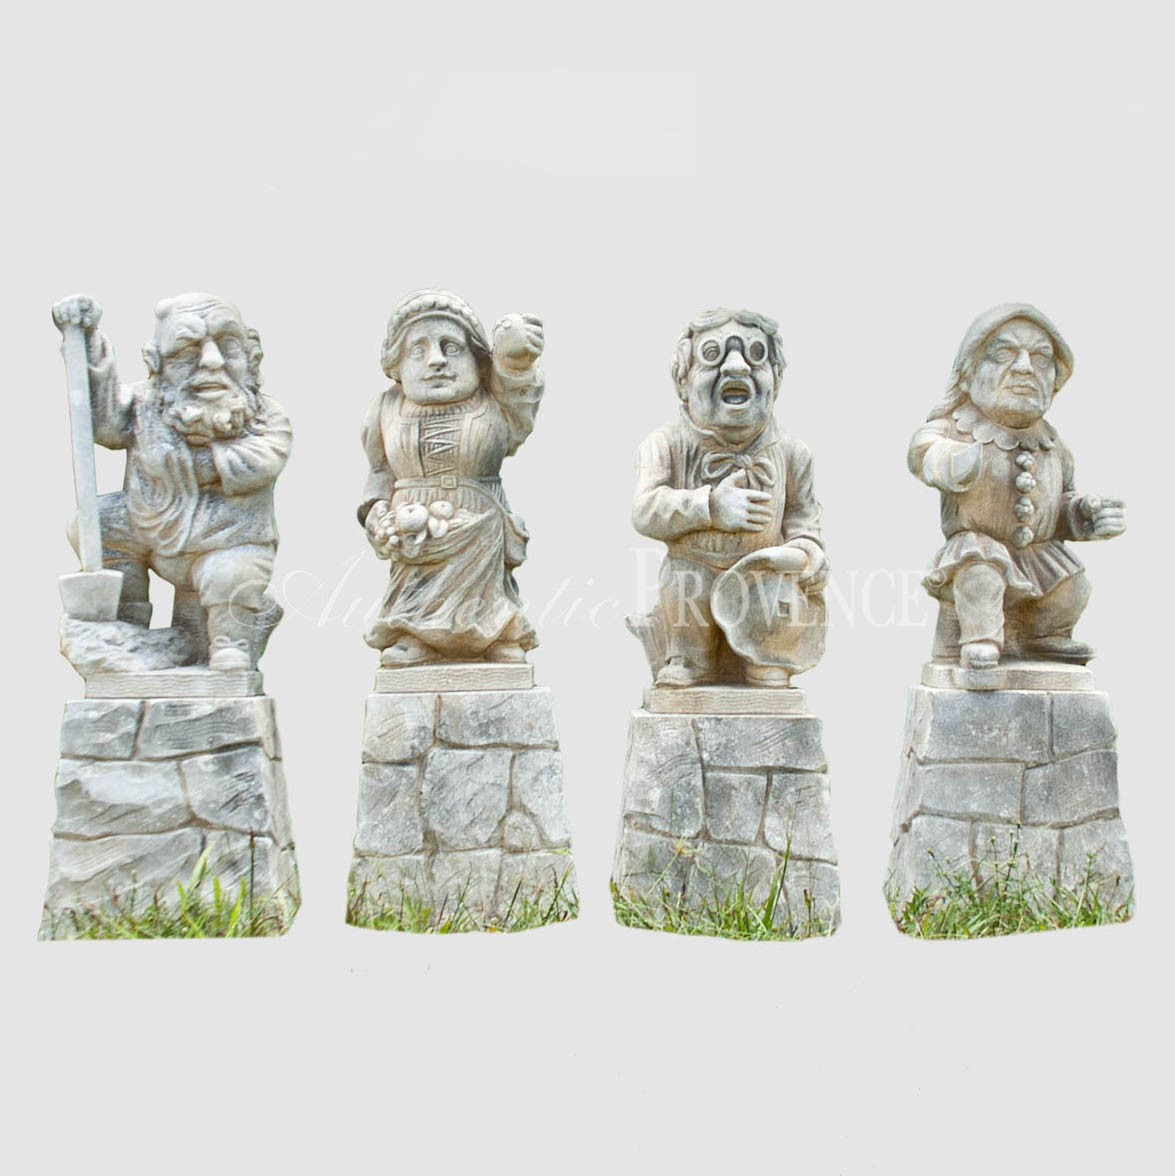 A set of four dwarf statues on original bases. Hand carved in limestone with nicely aged patina